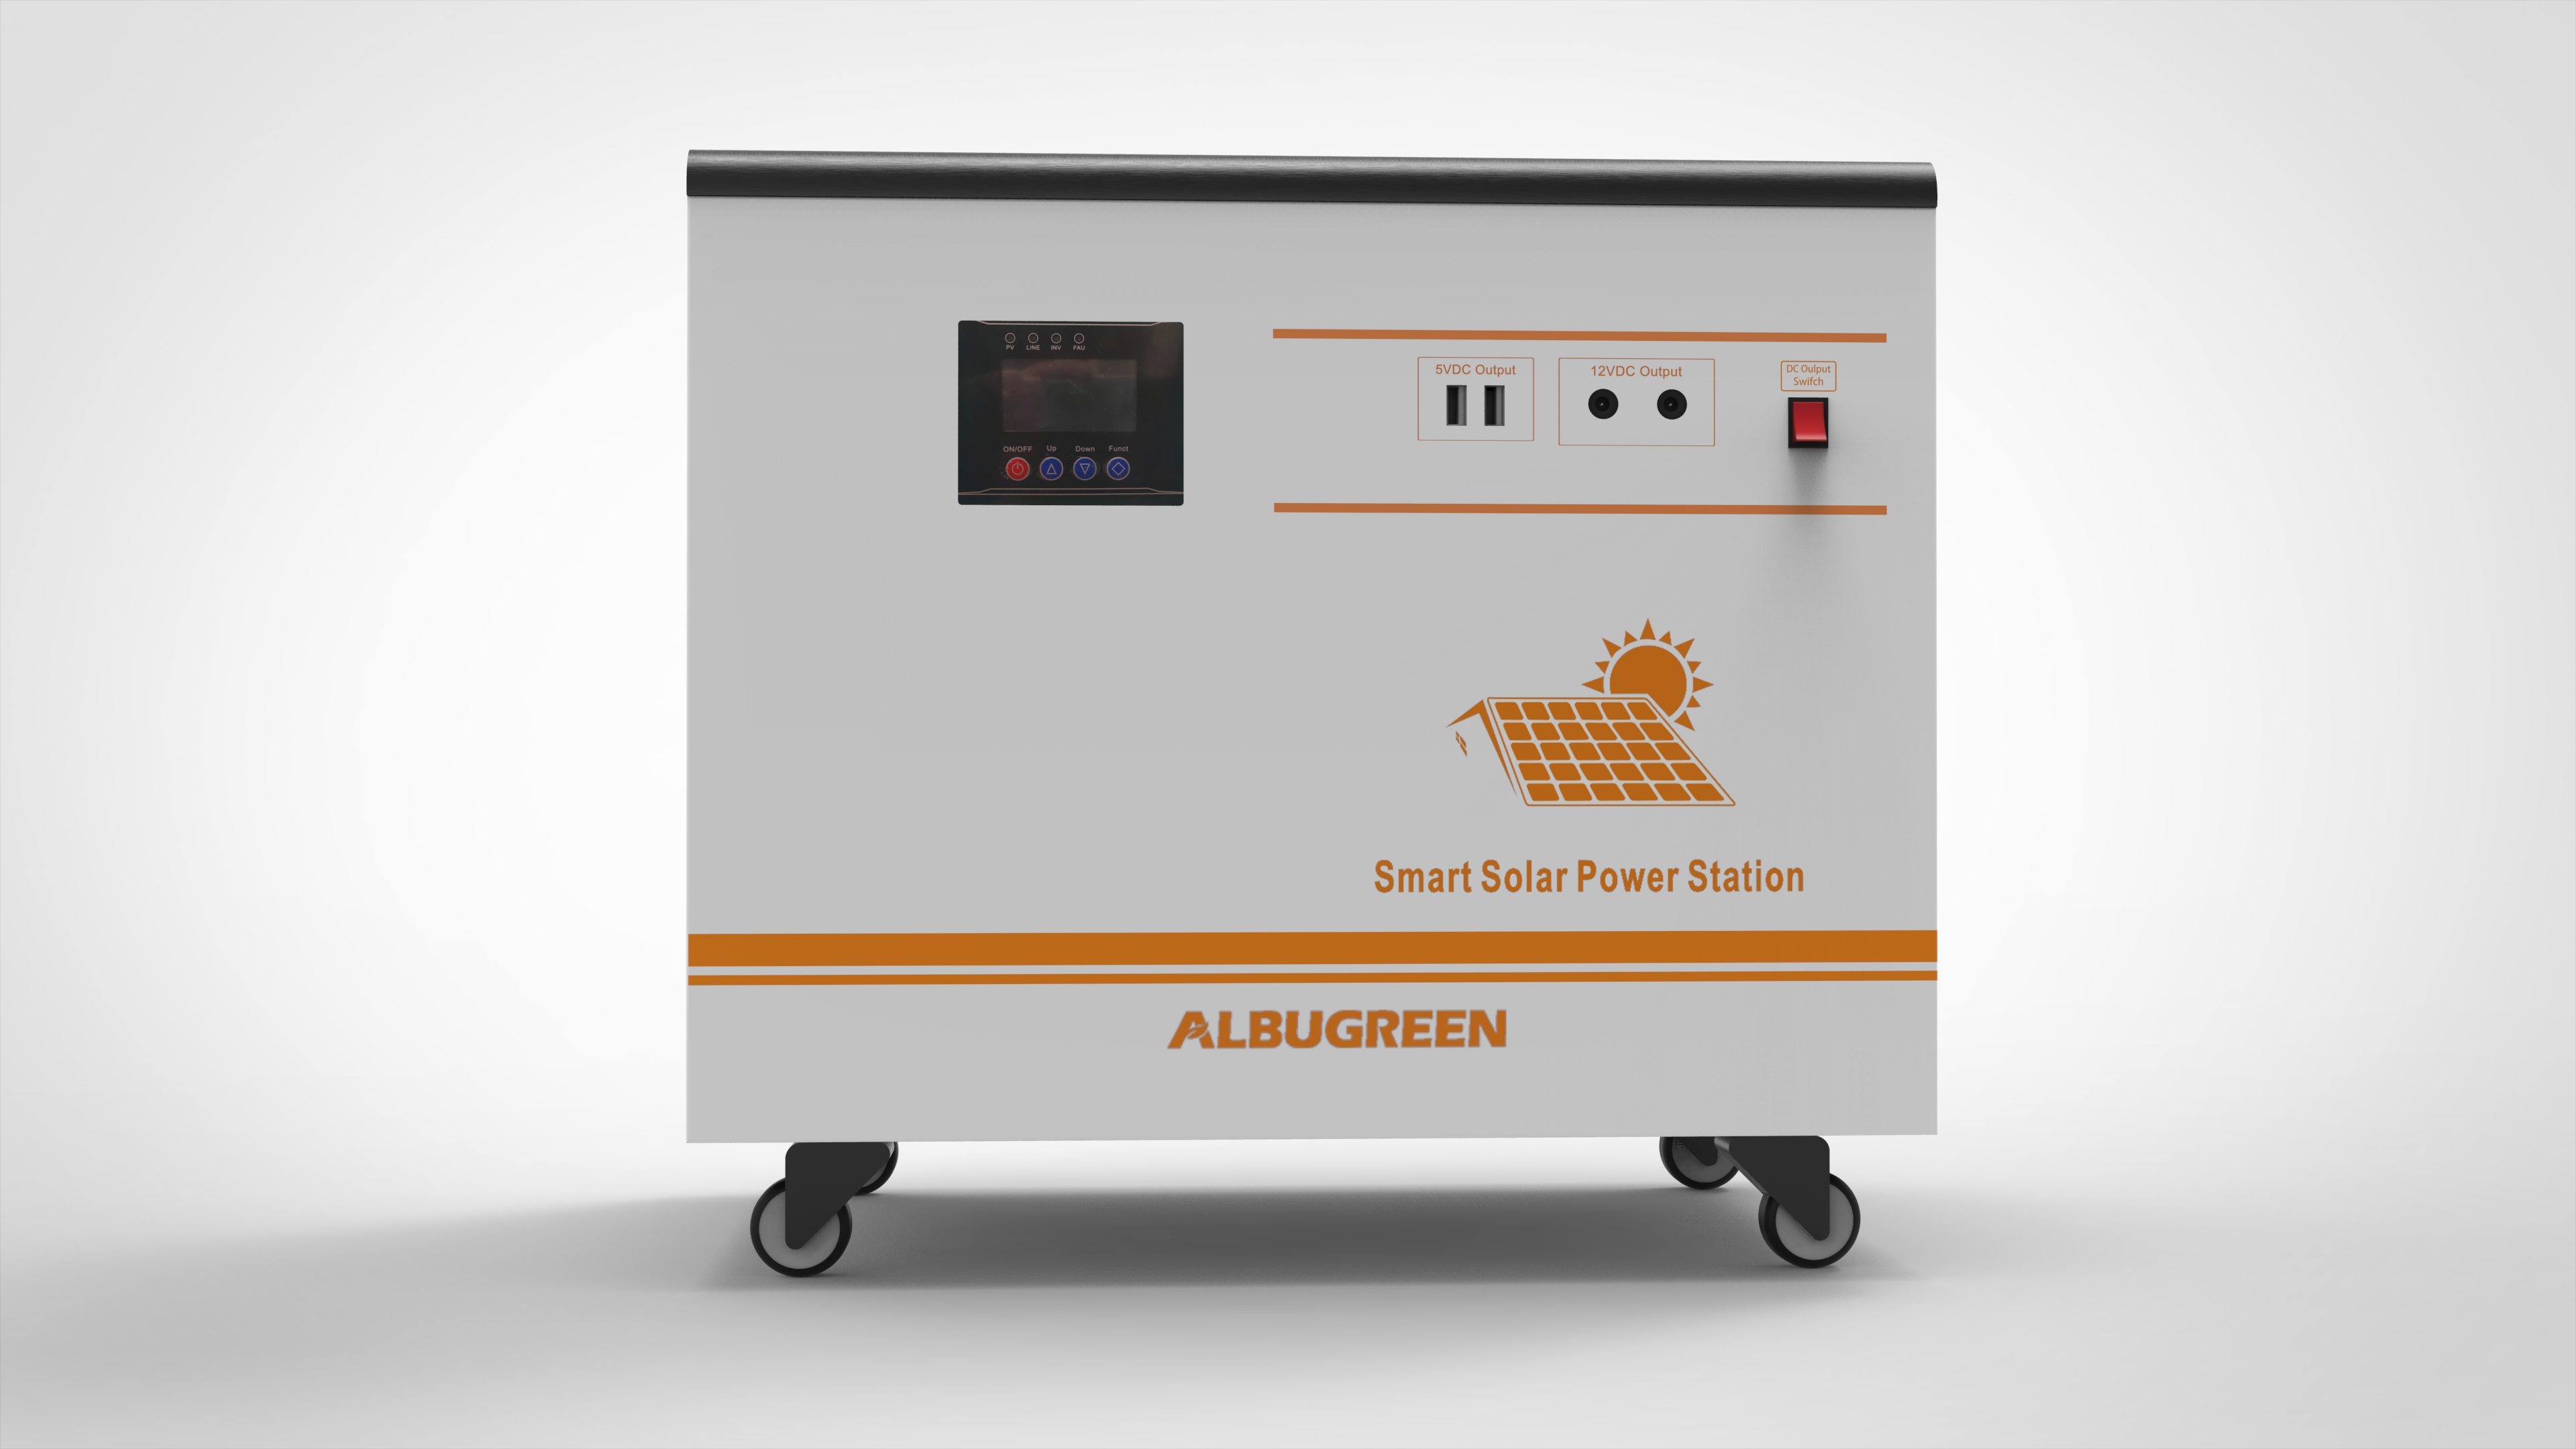 3000w 220v with 1000 Inverter in One Solar Power System for Campers